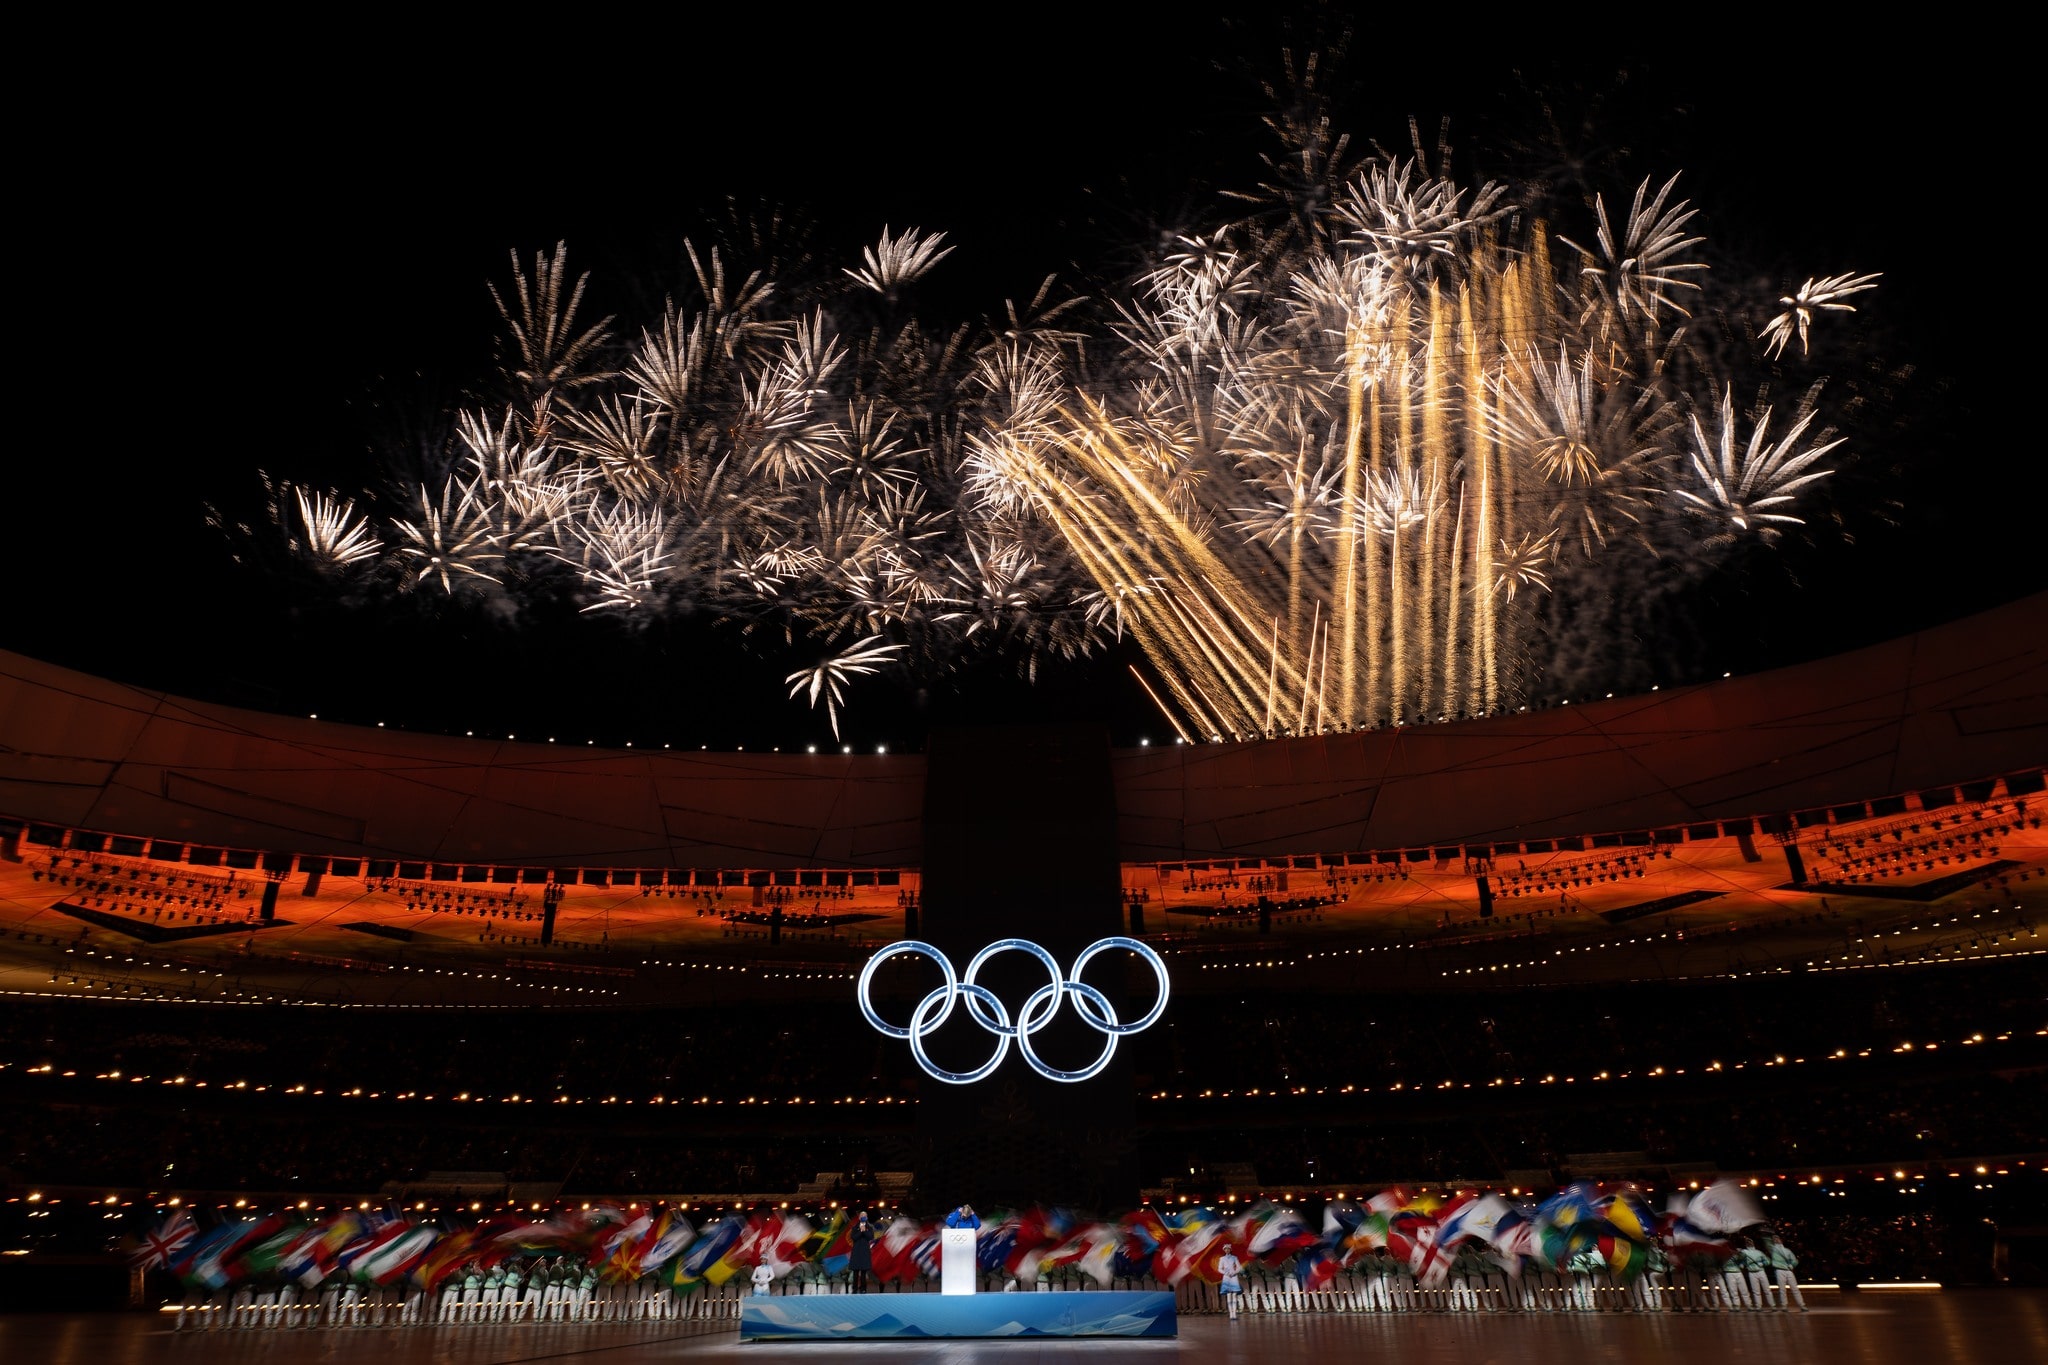 The IOCs decision on 2030 Olympic host is delayed until September 2023